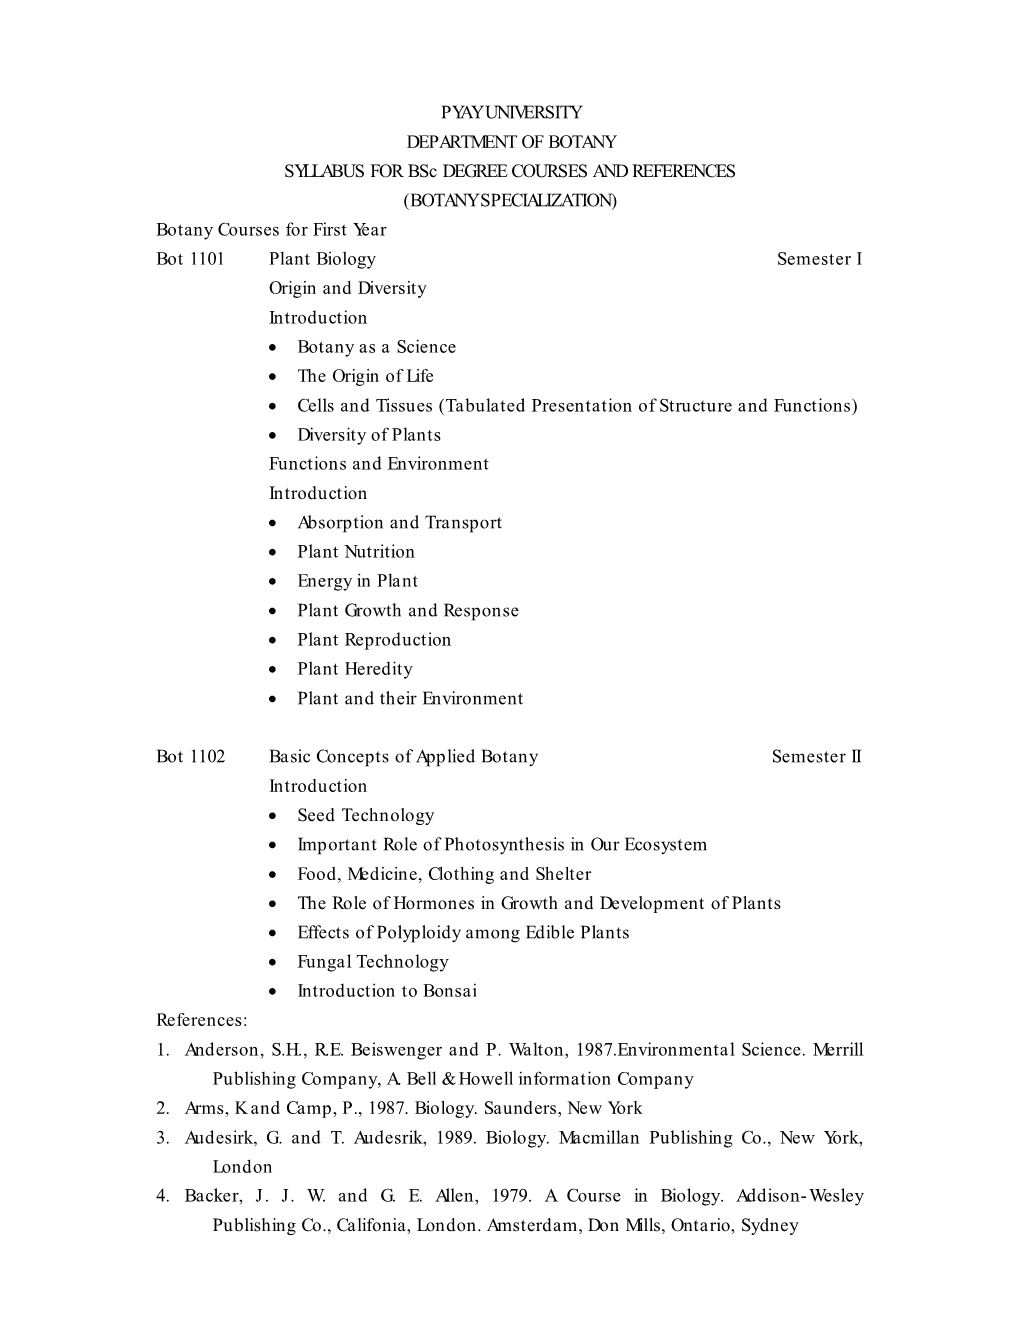 PYAY UNIVERSITY DEPARTMENT of BOTANY SYLLABUS for Bsc DEGREE COURSES and REFERENCES